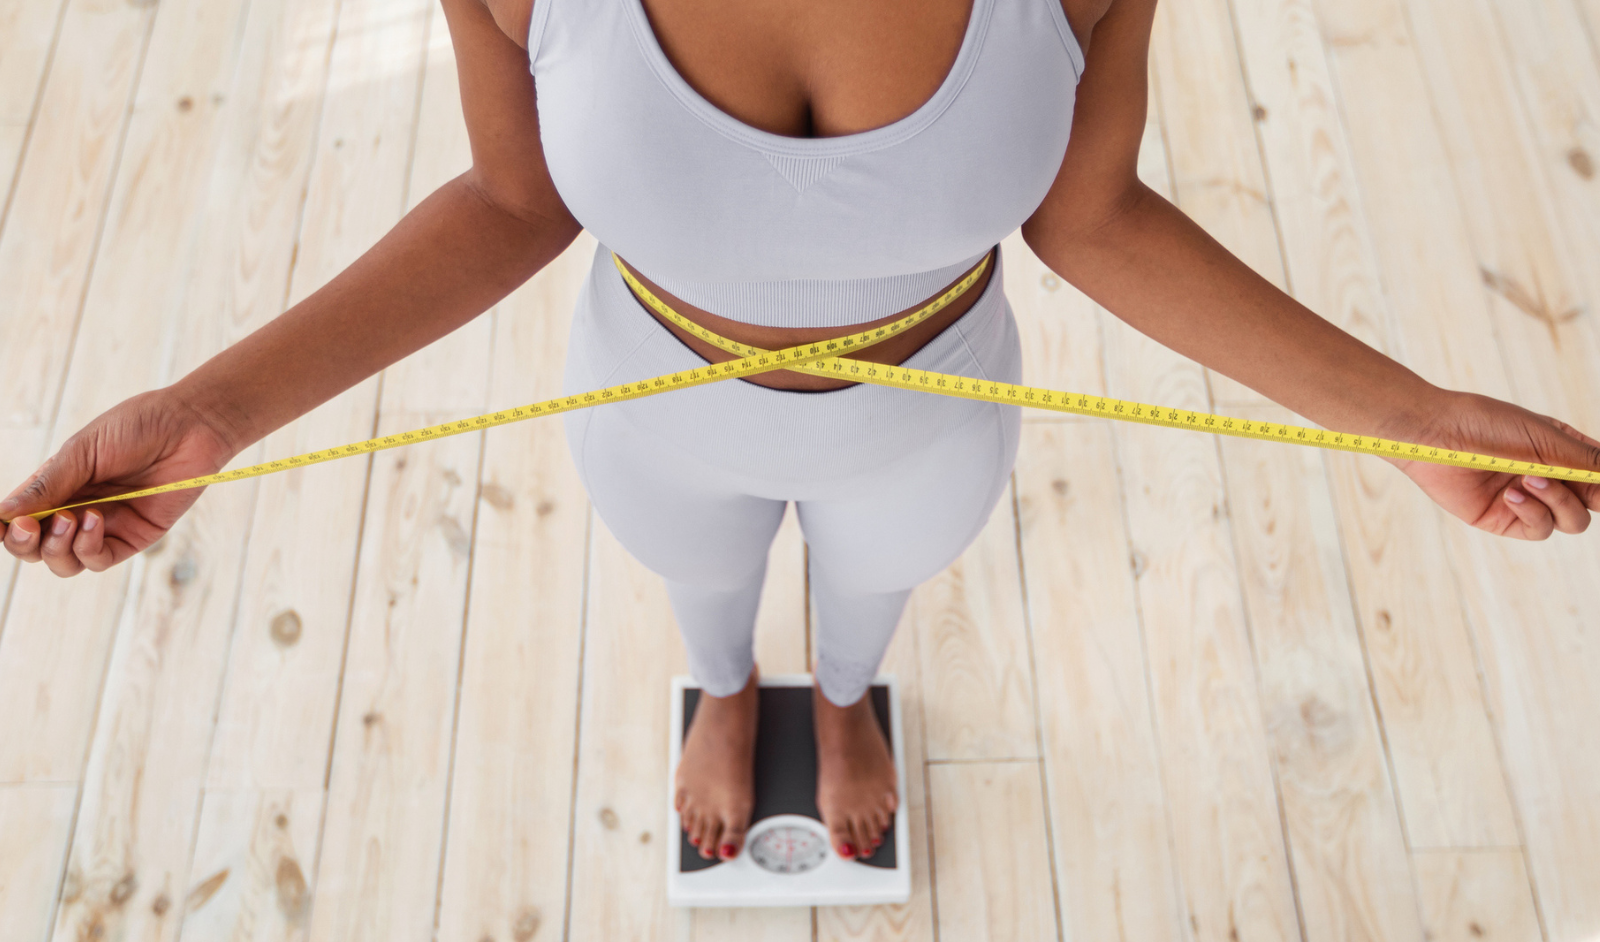 Weight Loss Blunders That Keep You Fat